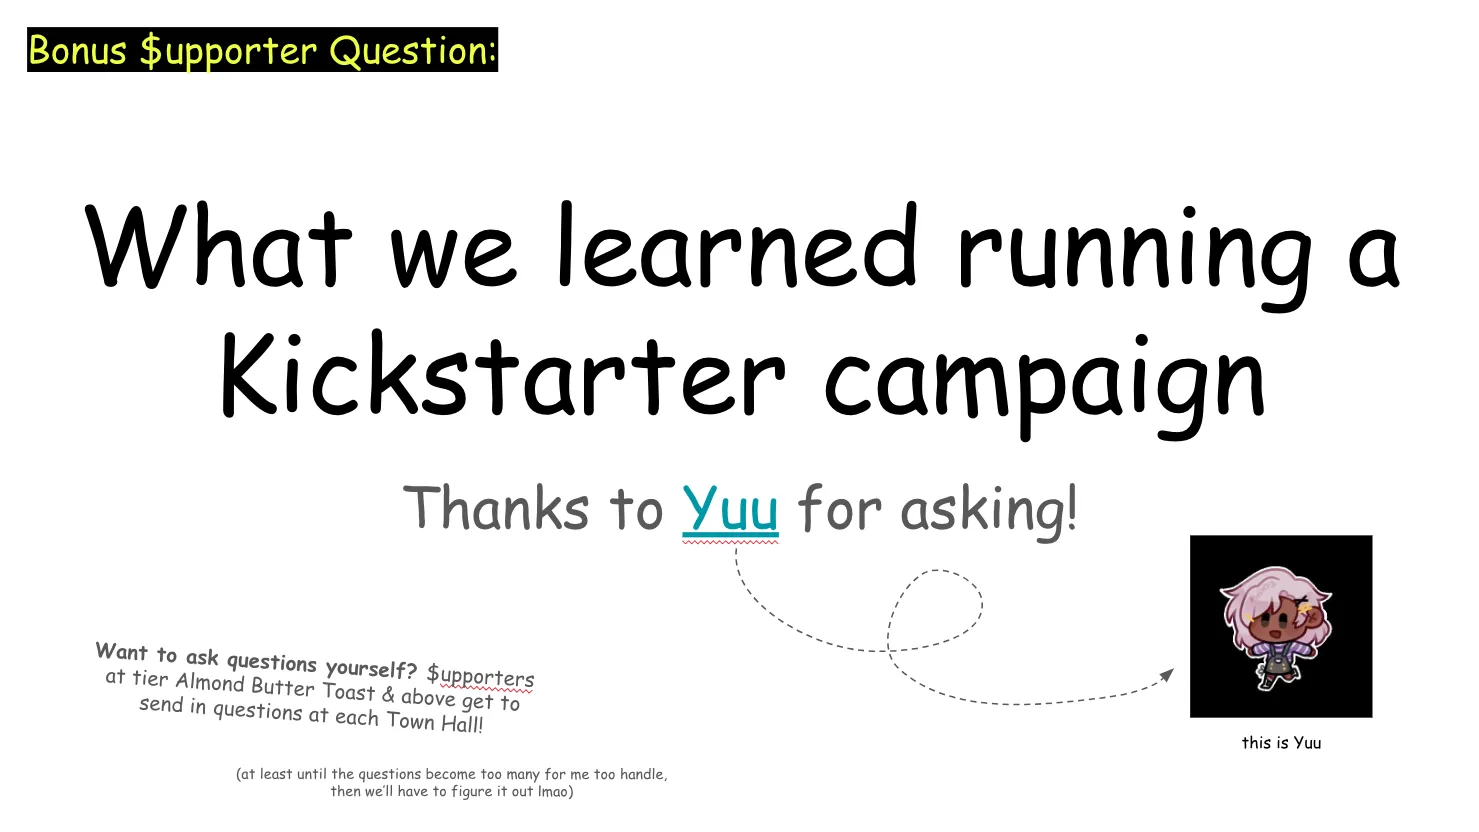 Slide 21:

Bonus Supporter Question: (Note: "supporter" is written with a dollar sign for the S where it appears)

What we learned running a Kickstarter campaign

Thanks to Yuu for asking!

There's an arrow pointing to Yuu's avatar

Want to ask questions yourself? Supporters at tier Almond Butter Toast & above get to send in questions at each Town Hall!

(at least until the questions become too many for me too handle, then we’ll have to figure it out lmao)